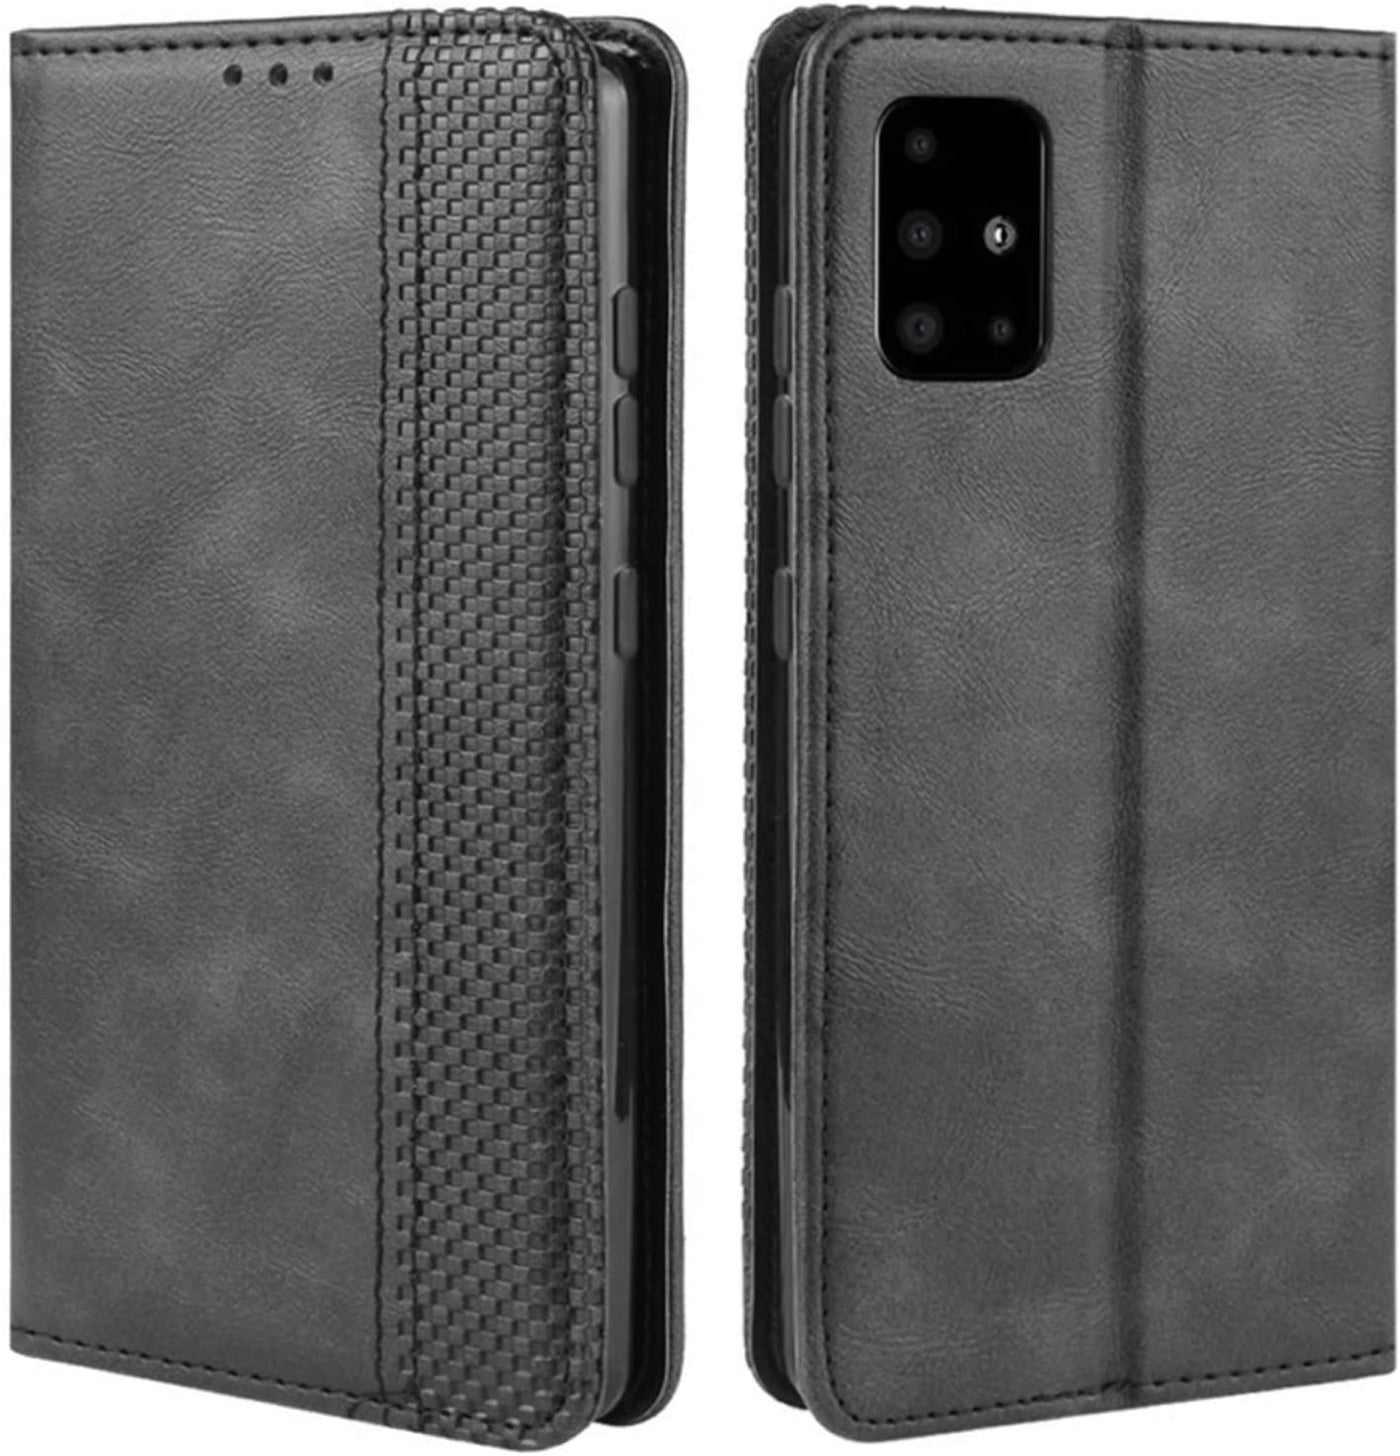 Samsung Galaxy A71 black color leather wallet flip cover case By excelsior